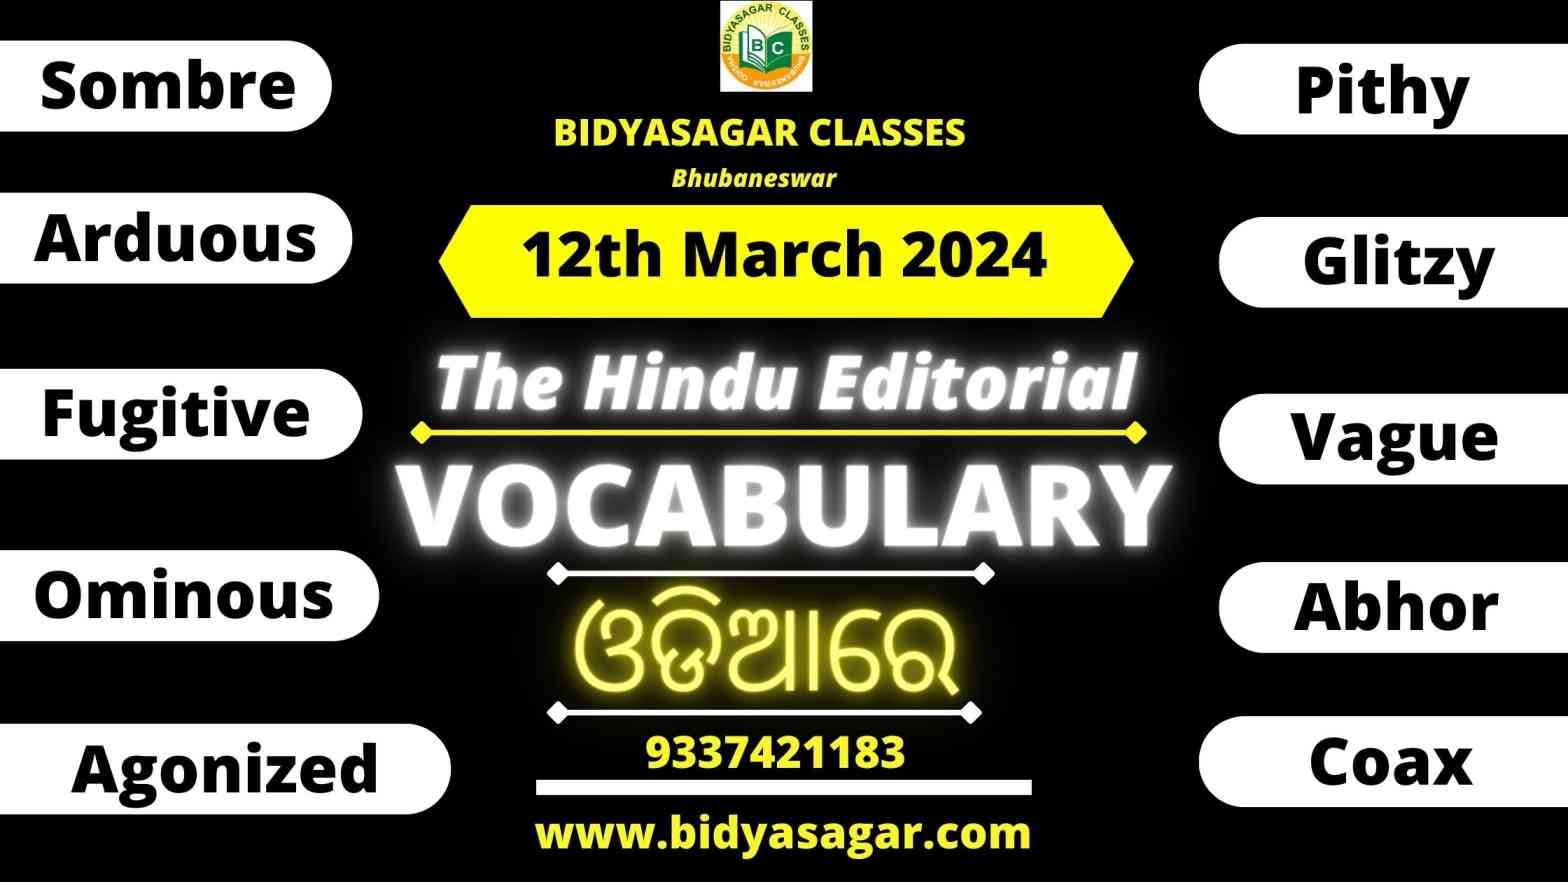 The Hindu Editorial Vocabulary of 12th March 2024